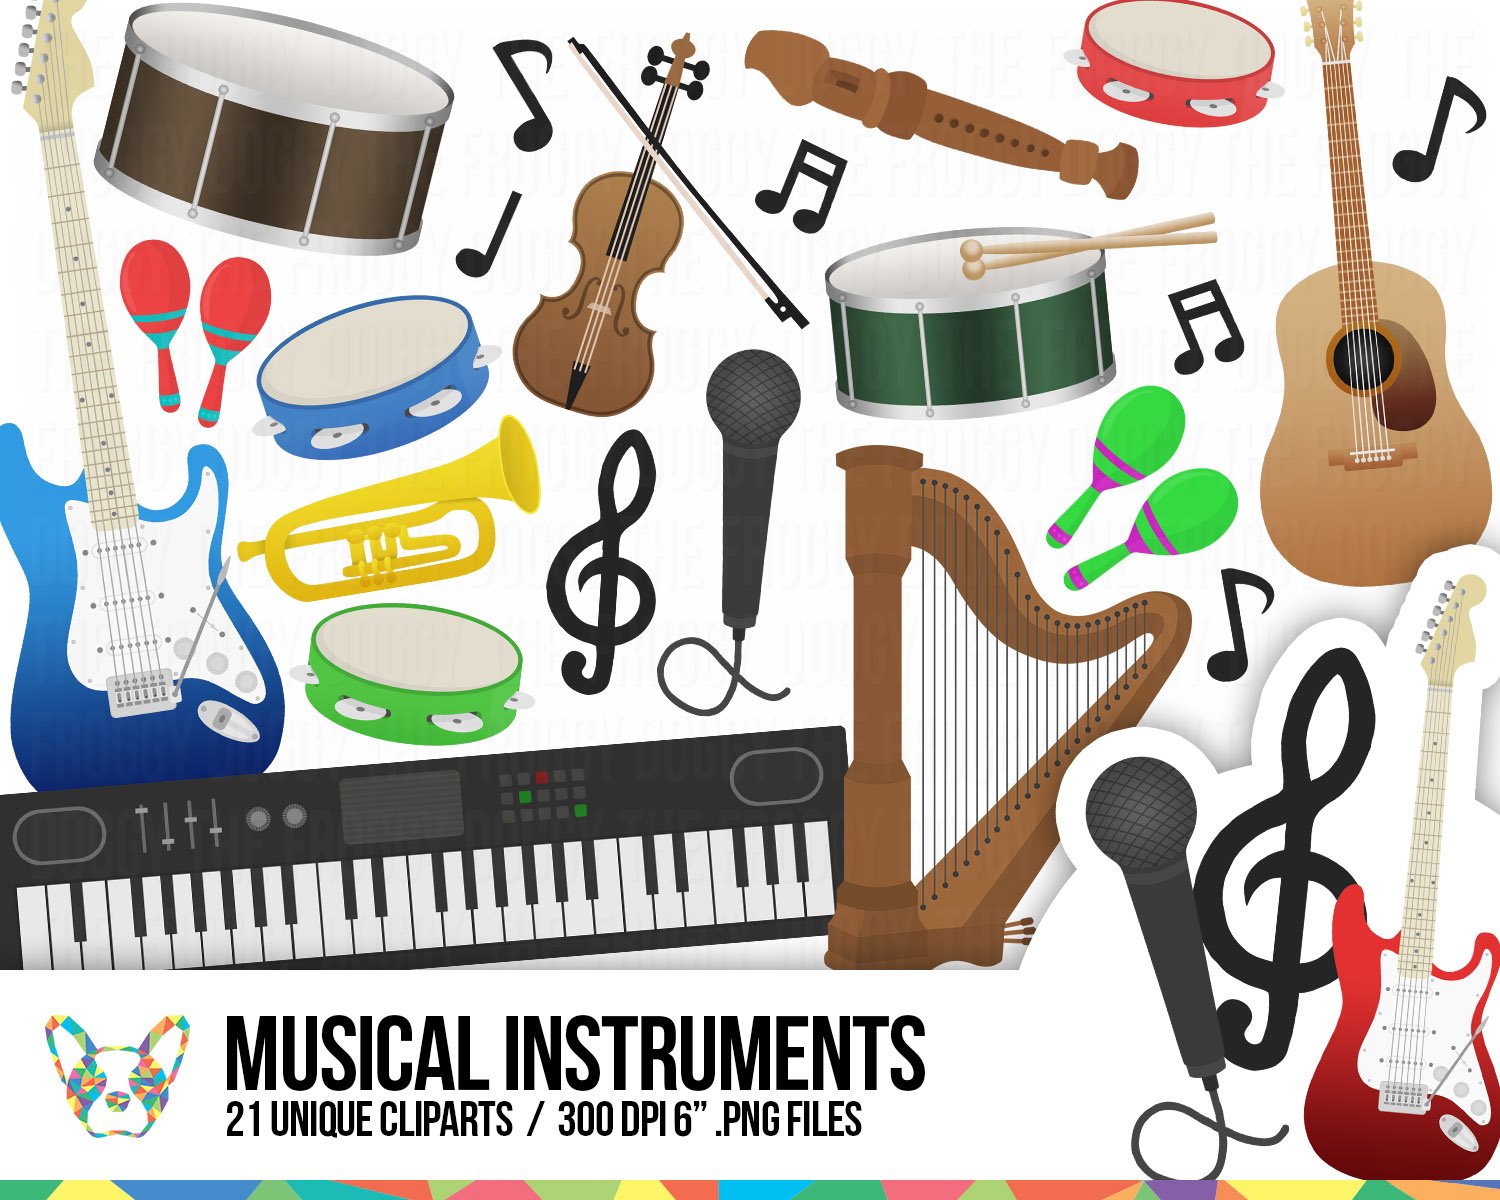 Musical Instruments Cliparts cover image.